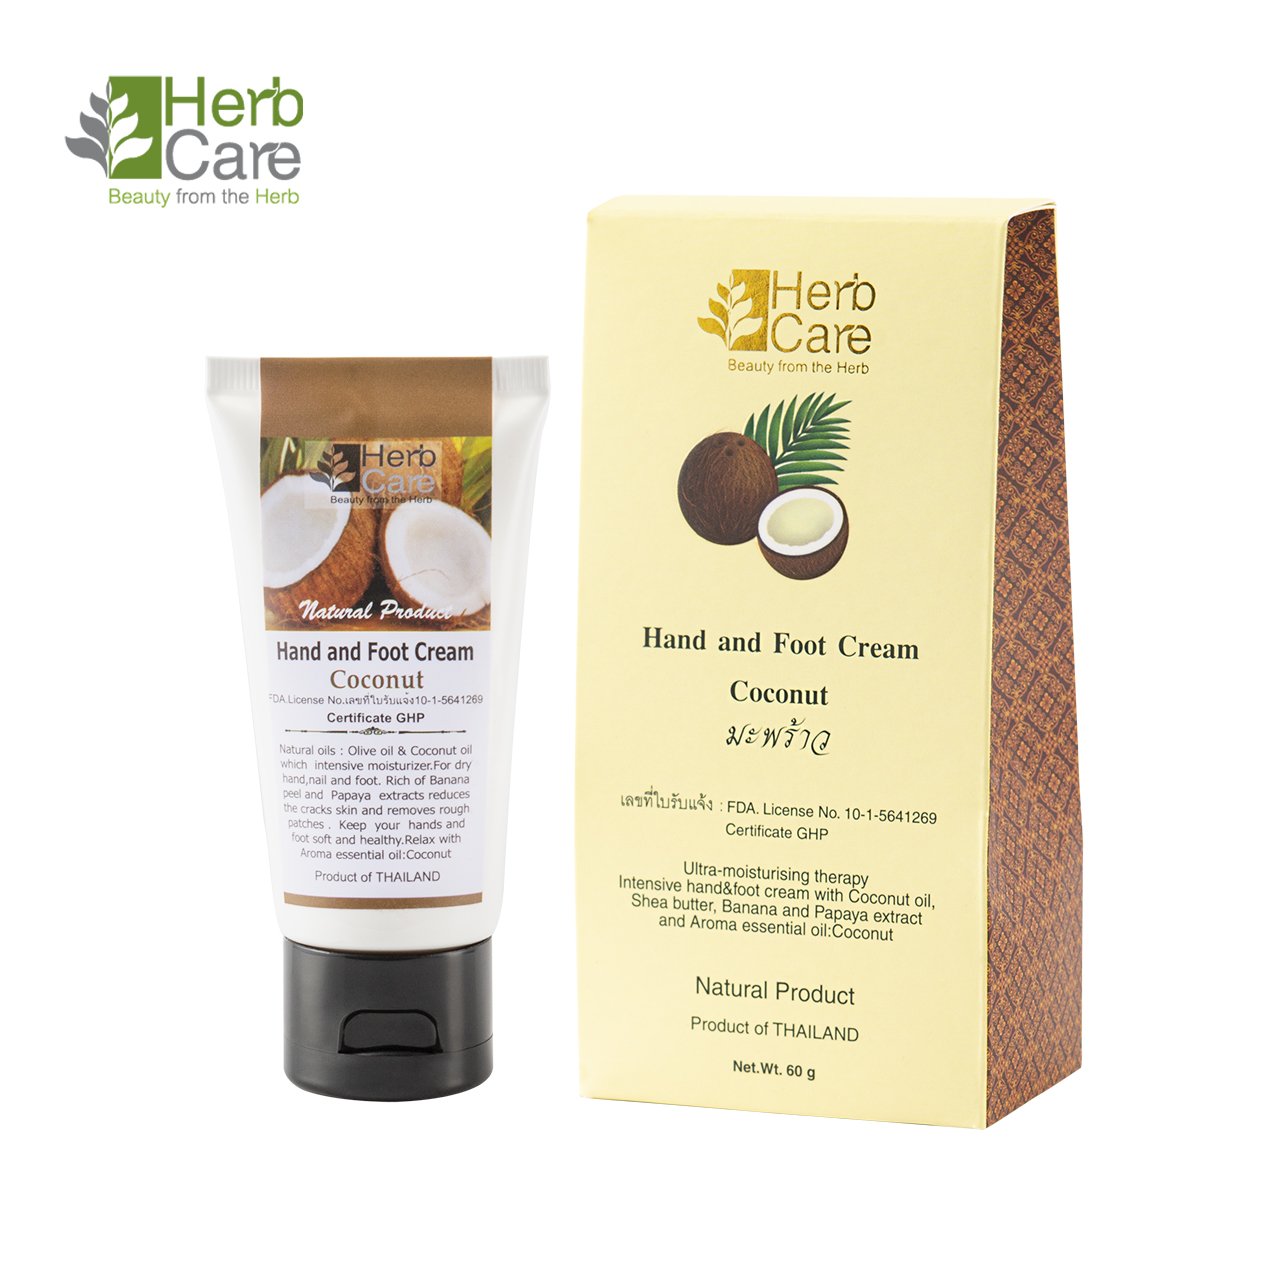 Coconut : Hand and Foot Cream